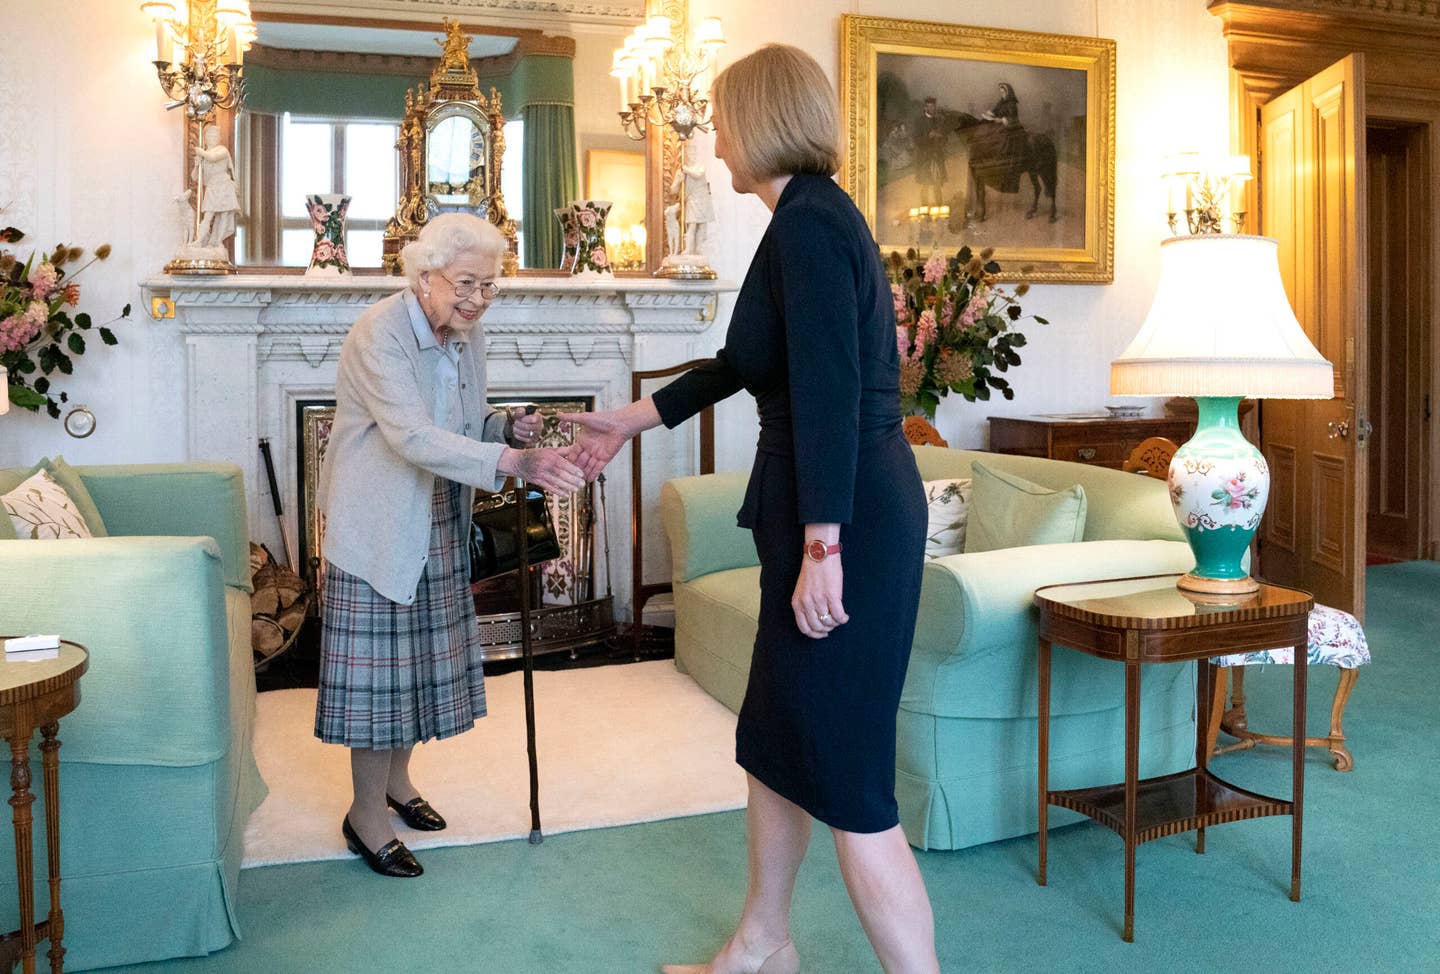 Shortly before she died, Queen Elizabeth greeted the newly elected leader of the Conservative party Liz Truss as she arrives at Balmoral Castle for an audience where she will be invited to become Prime Minister and form a new government on September 6, 2022 in Aberdeen, Scotland.  (Photo by Jane Barlow - WPA Pool/Getty Images)